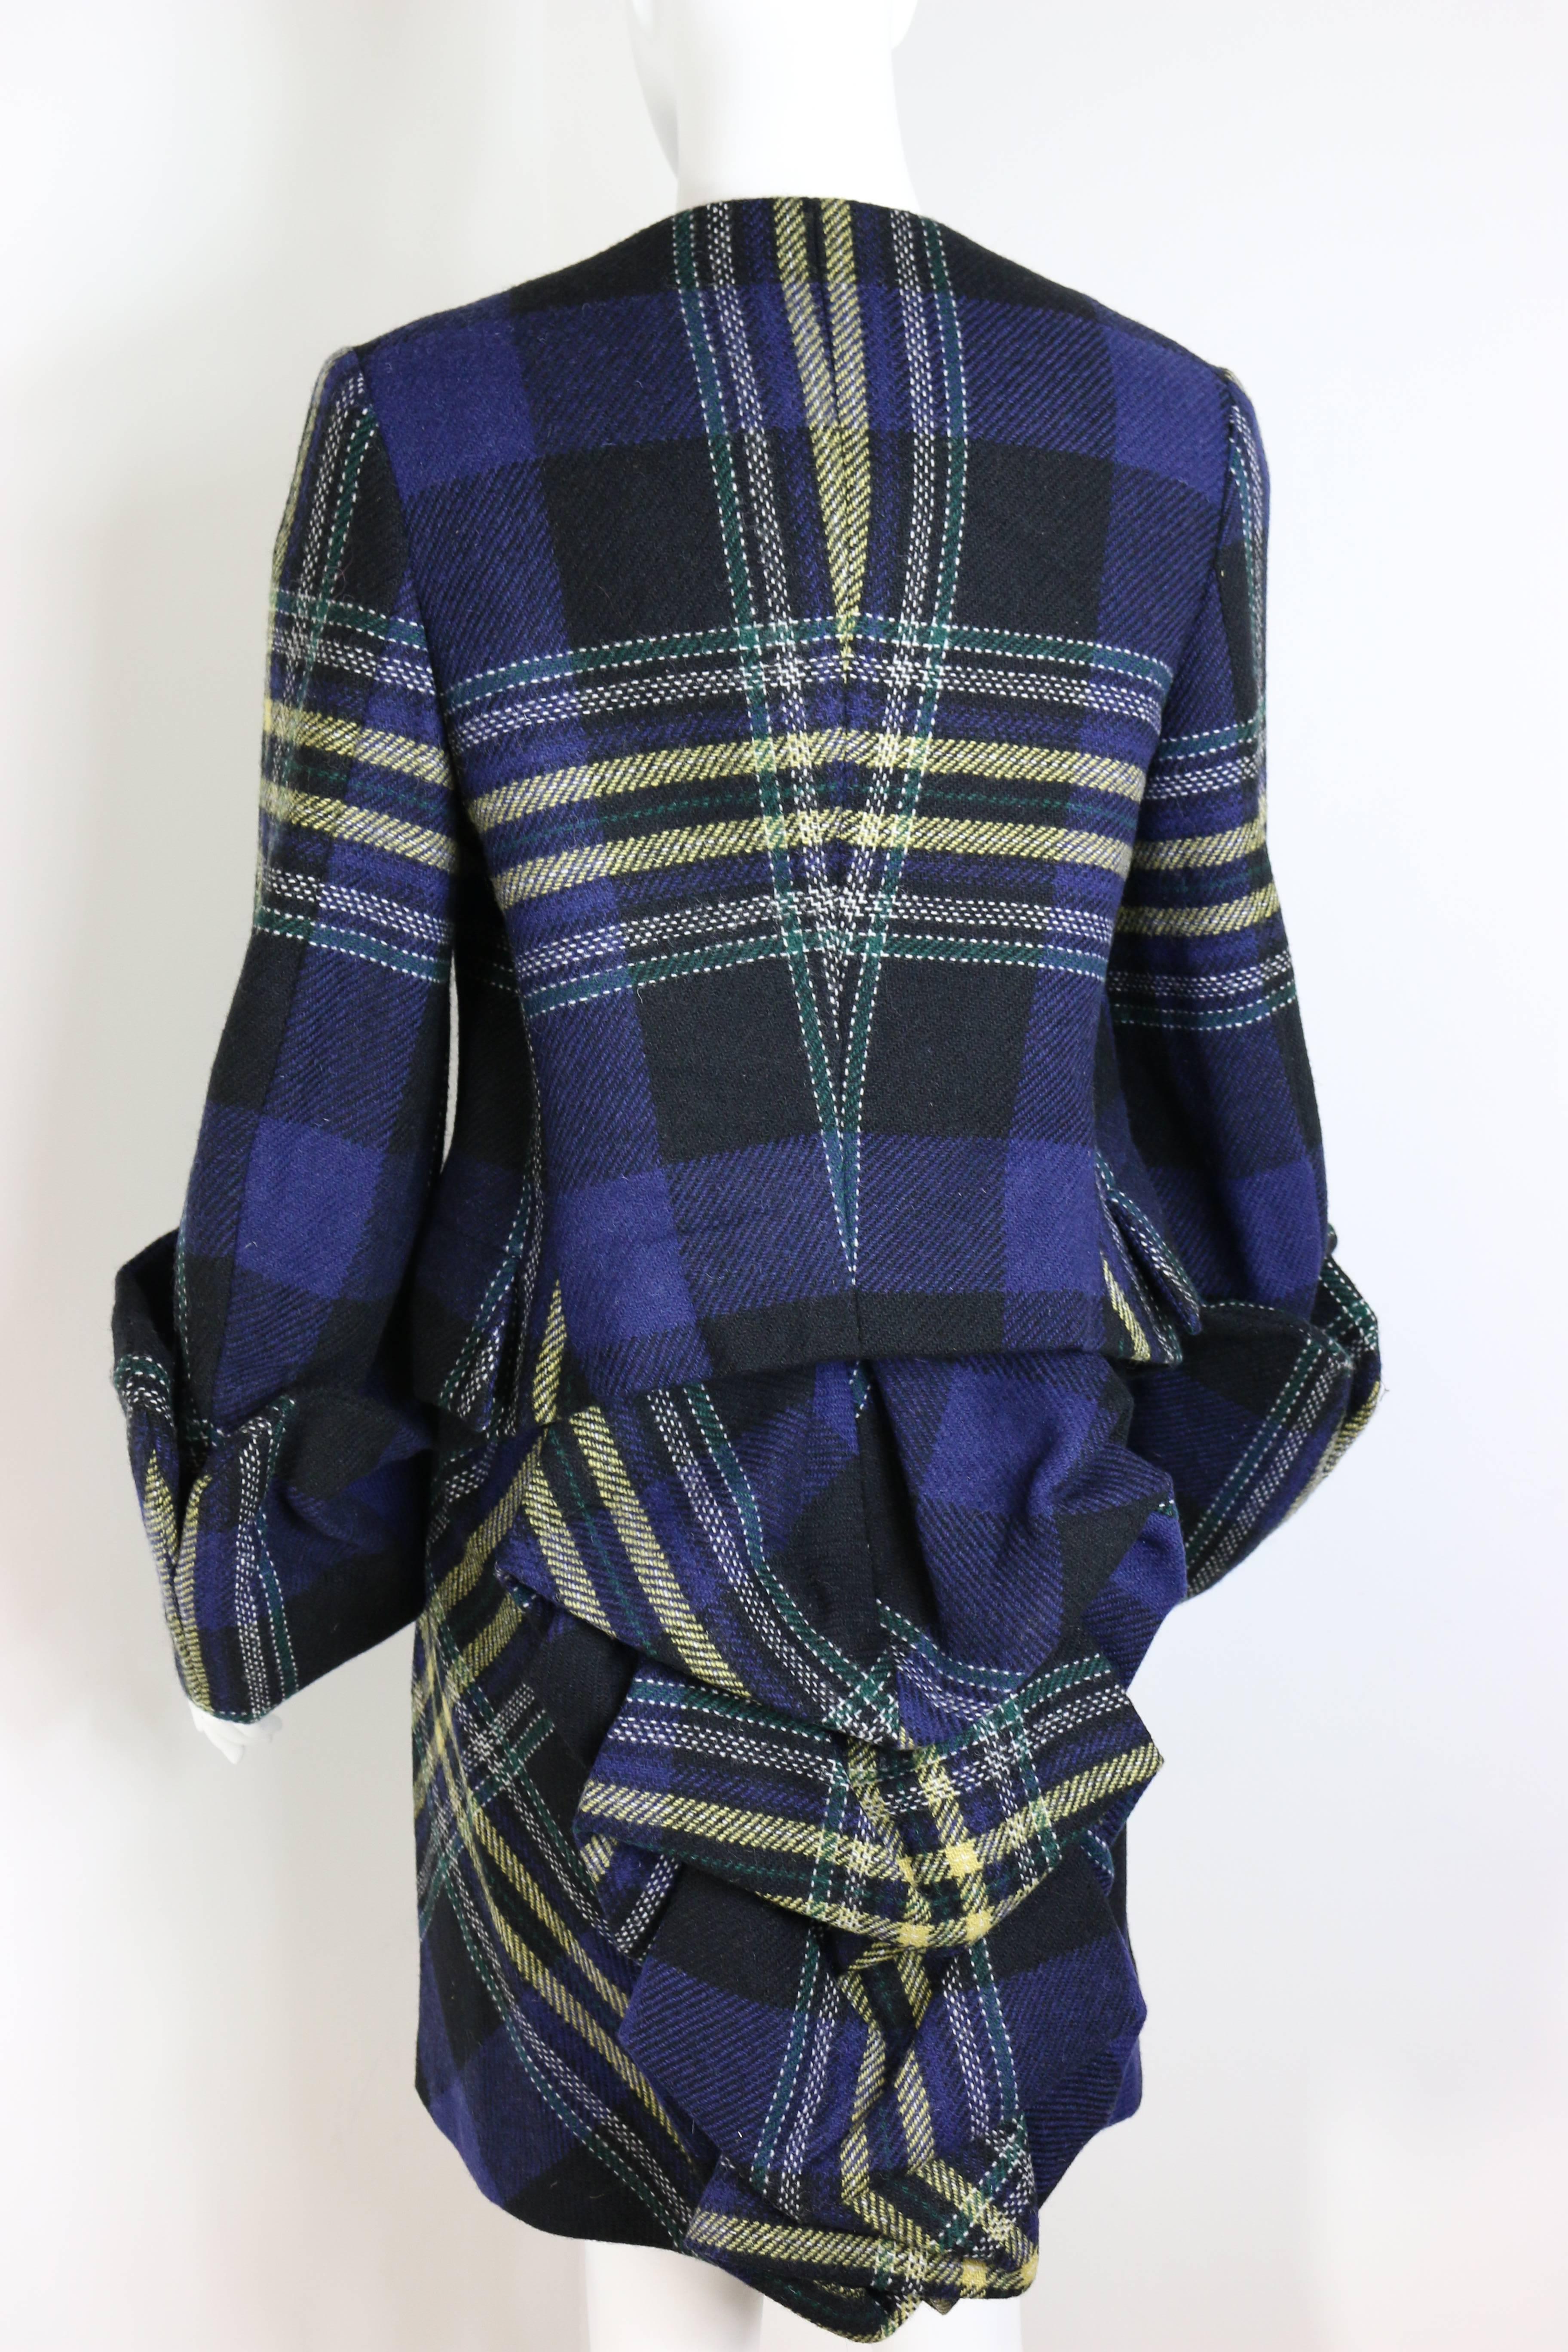 - Vivienne Westwood is Queen of Punk signature tartan suit in the 90s. It is a very collectable item. The sleeves are like 3/4 length. 

- Featuring five iconic Vivienne Westwood logo buttons. 

- Pleated ruffles bustle skirt.  

- Size 42. 

-